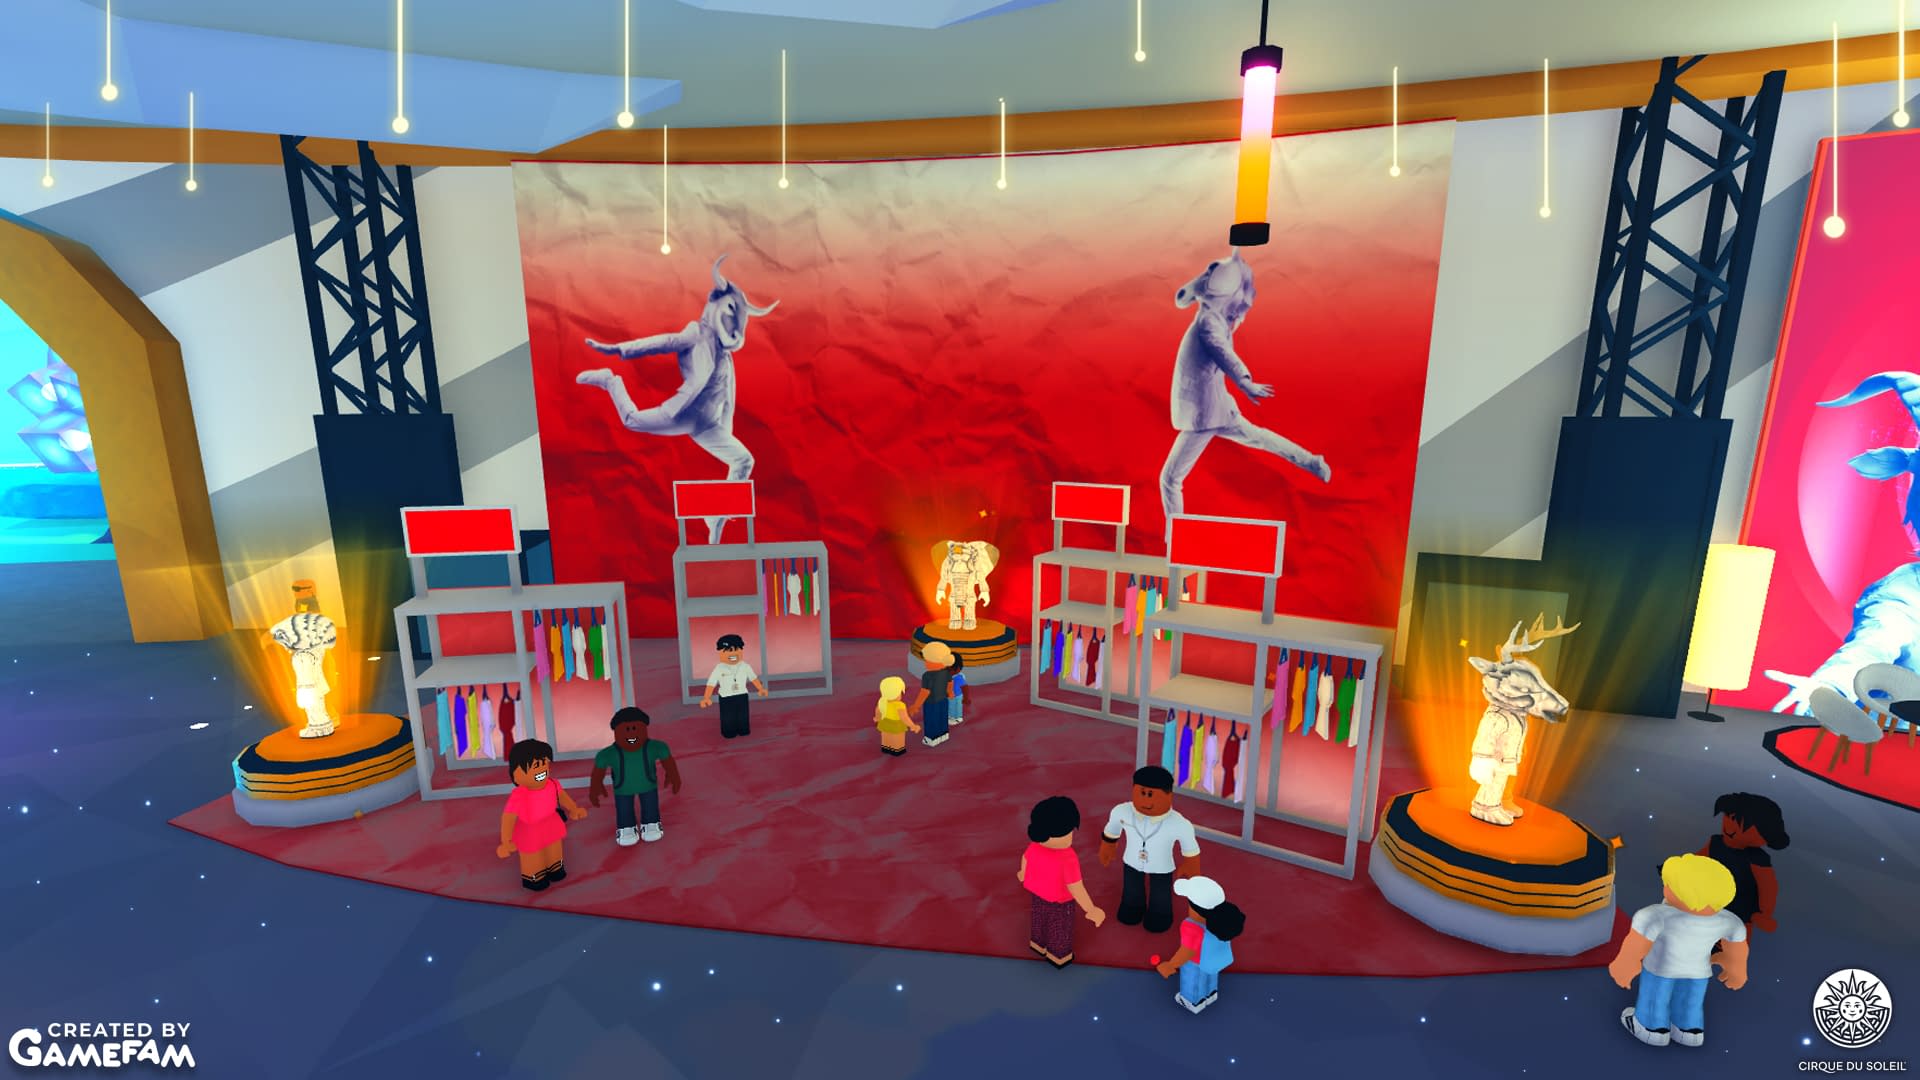 How to play Roblox's Cirque Du Soleil event - Dexerto